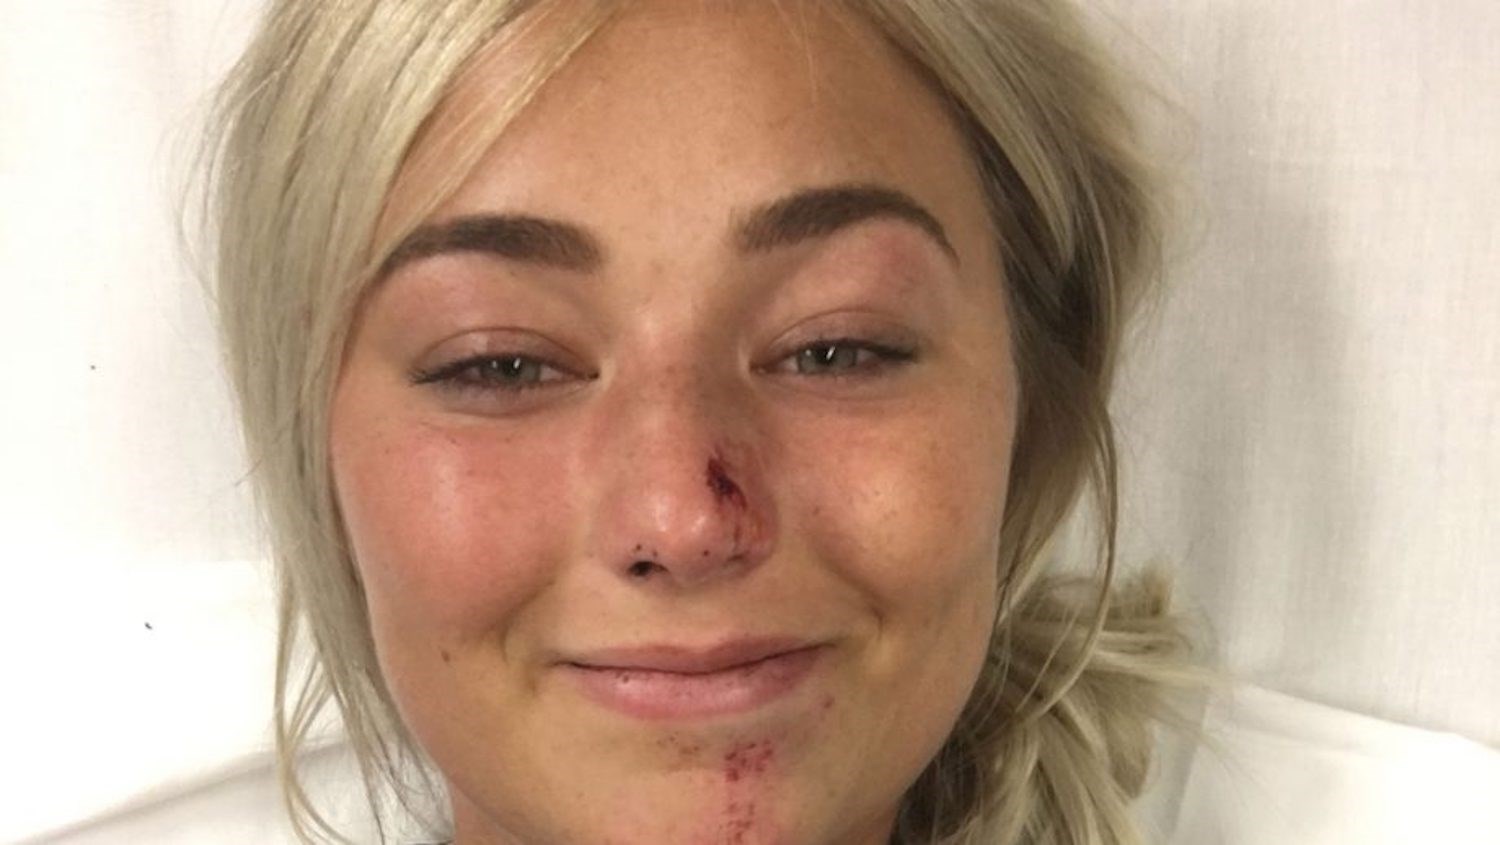 This Woman’s Brow Pencil Review Goes Viral After She Is Hit By A CAR